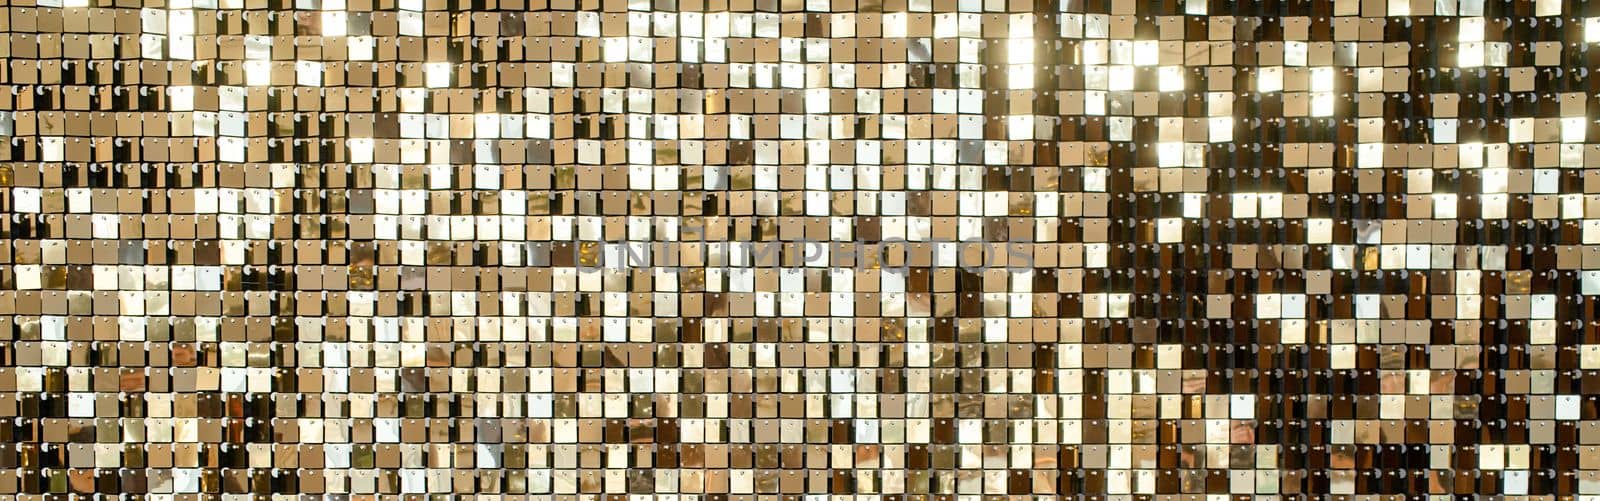 Golden metal shiny pieces making festive abstract texture by Desperada